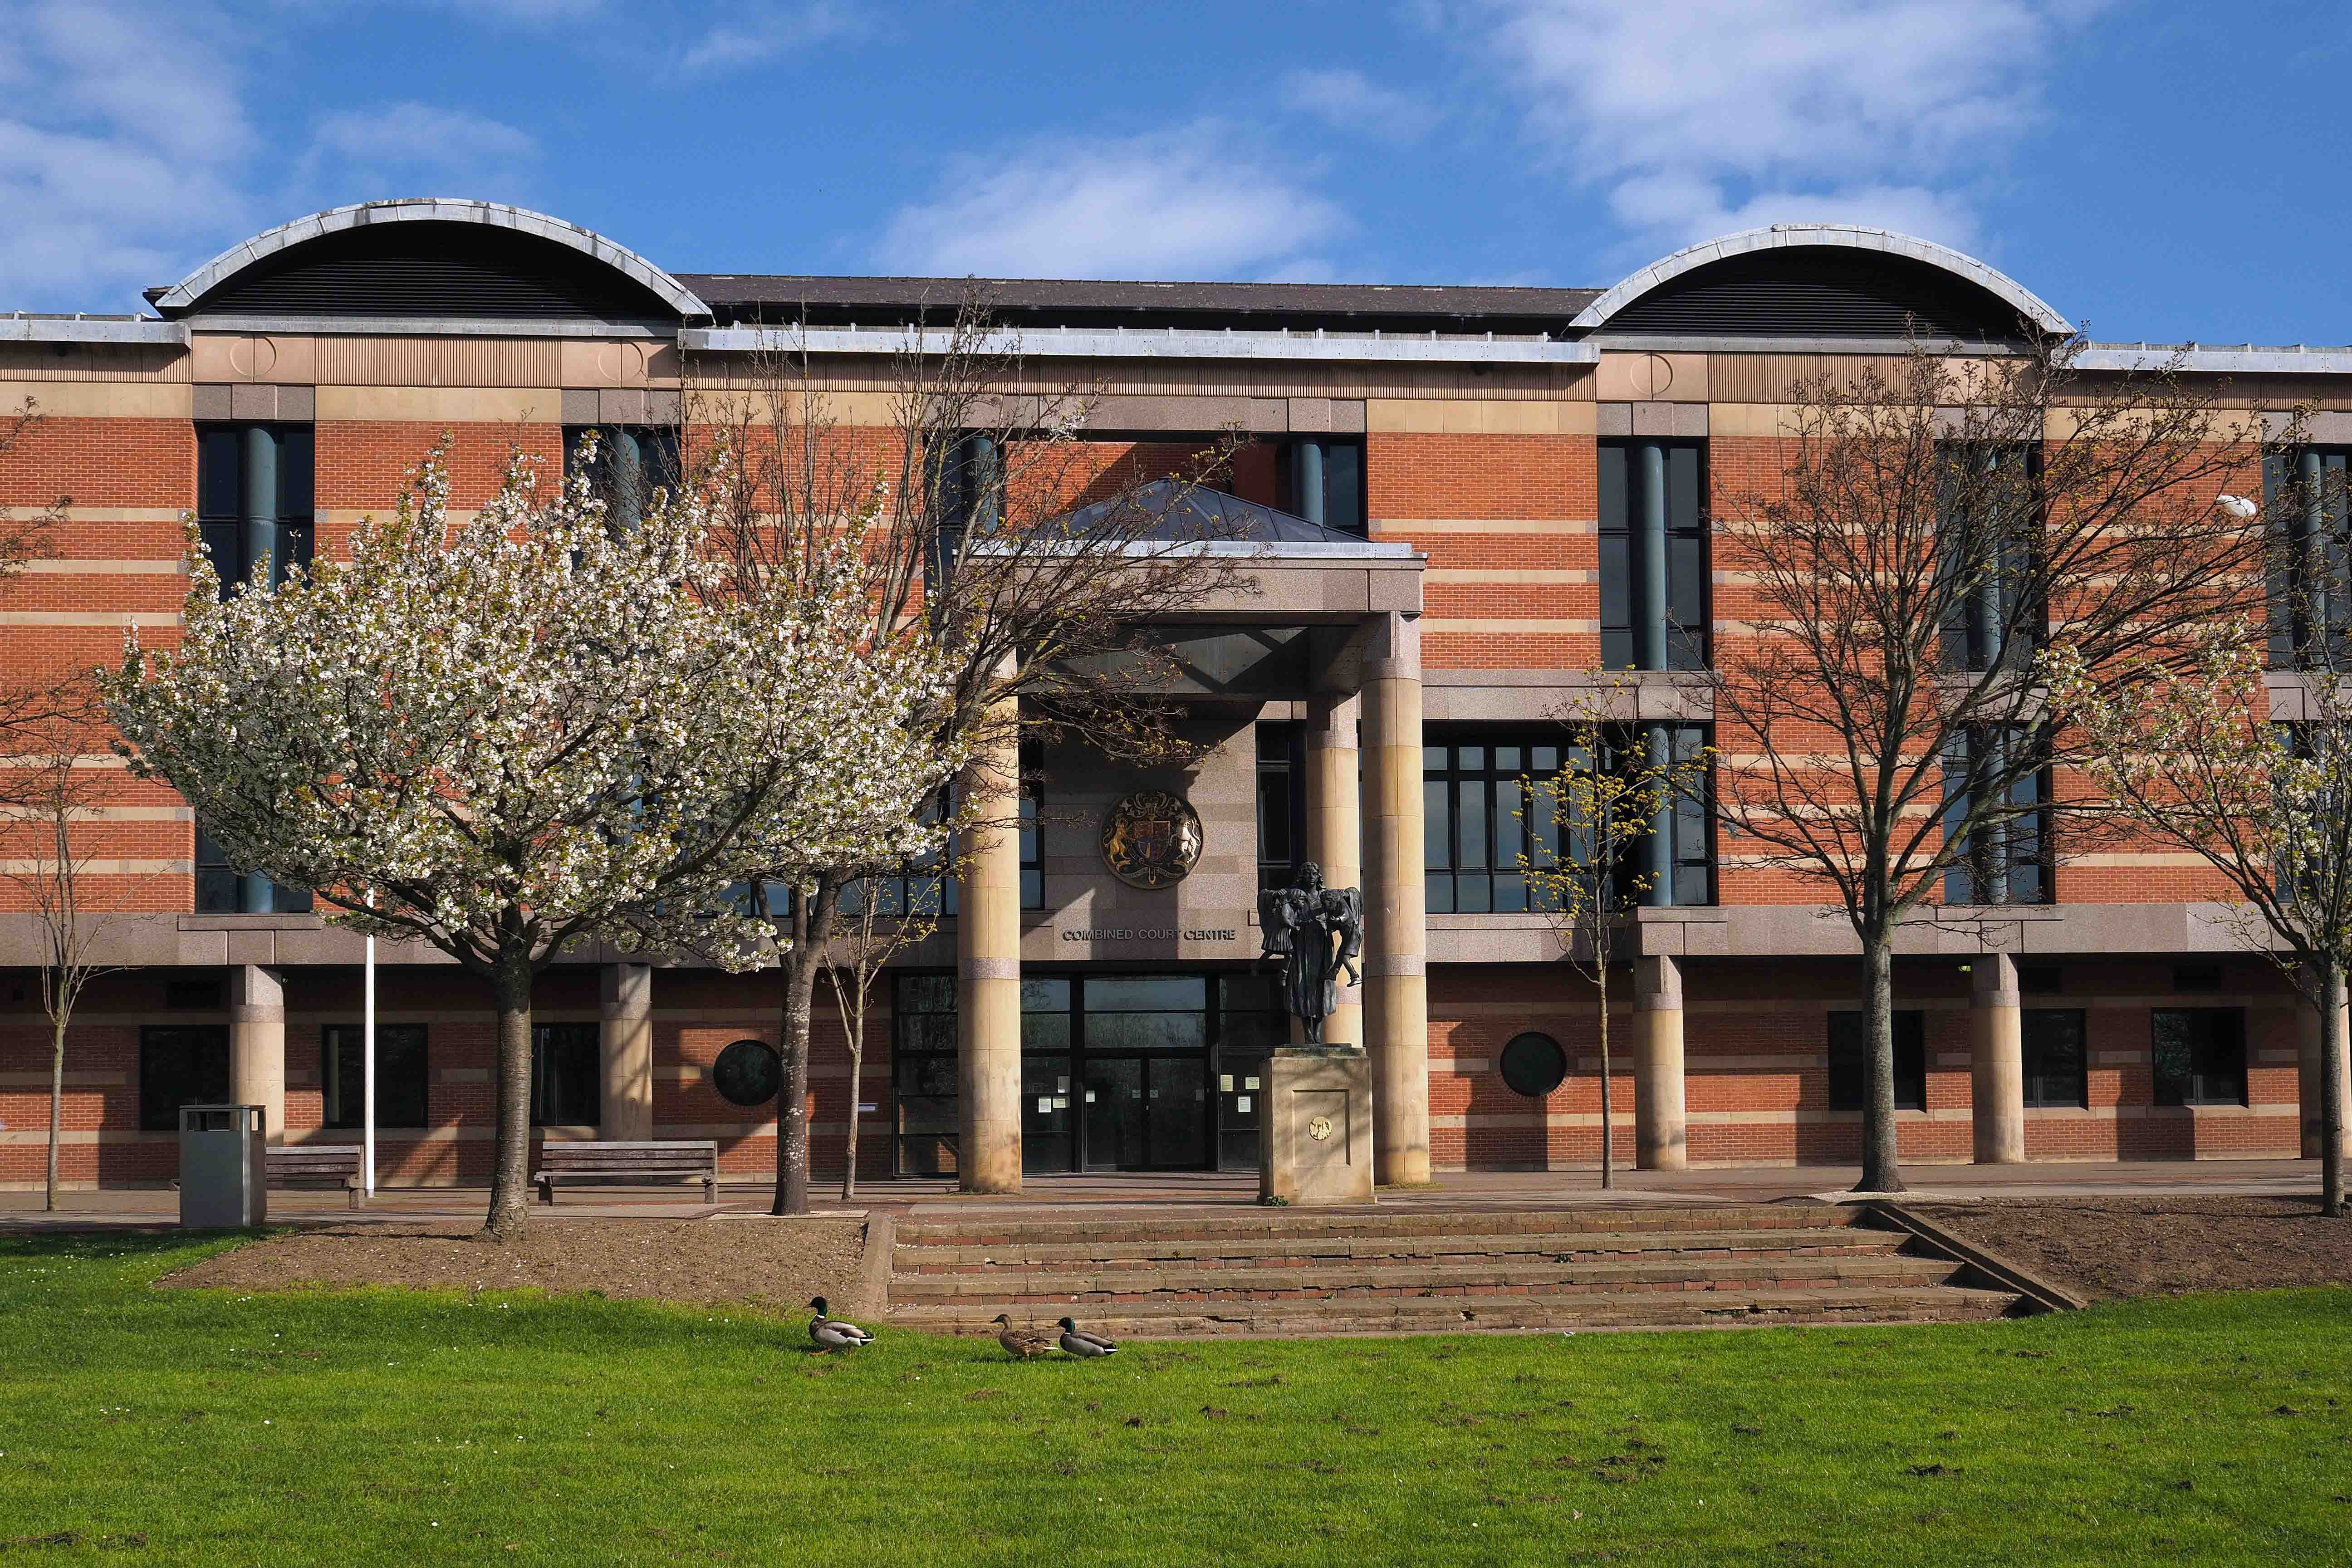 The judge at Teesside Crown Court in Middlesbrough told Alid he had shown ‘no genuine remorse or pity’ for his victims